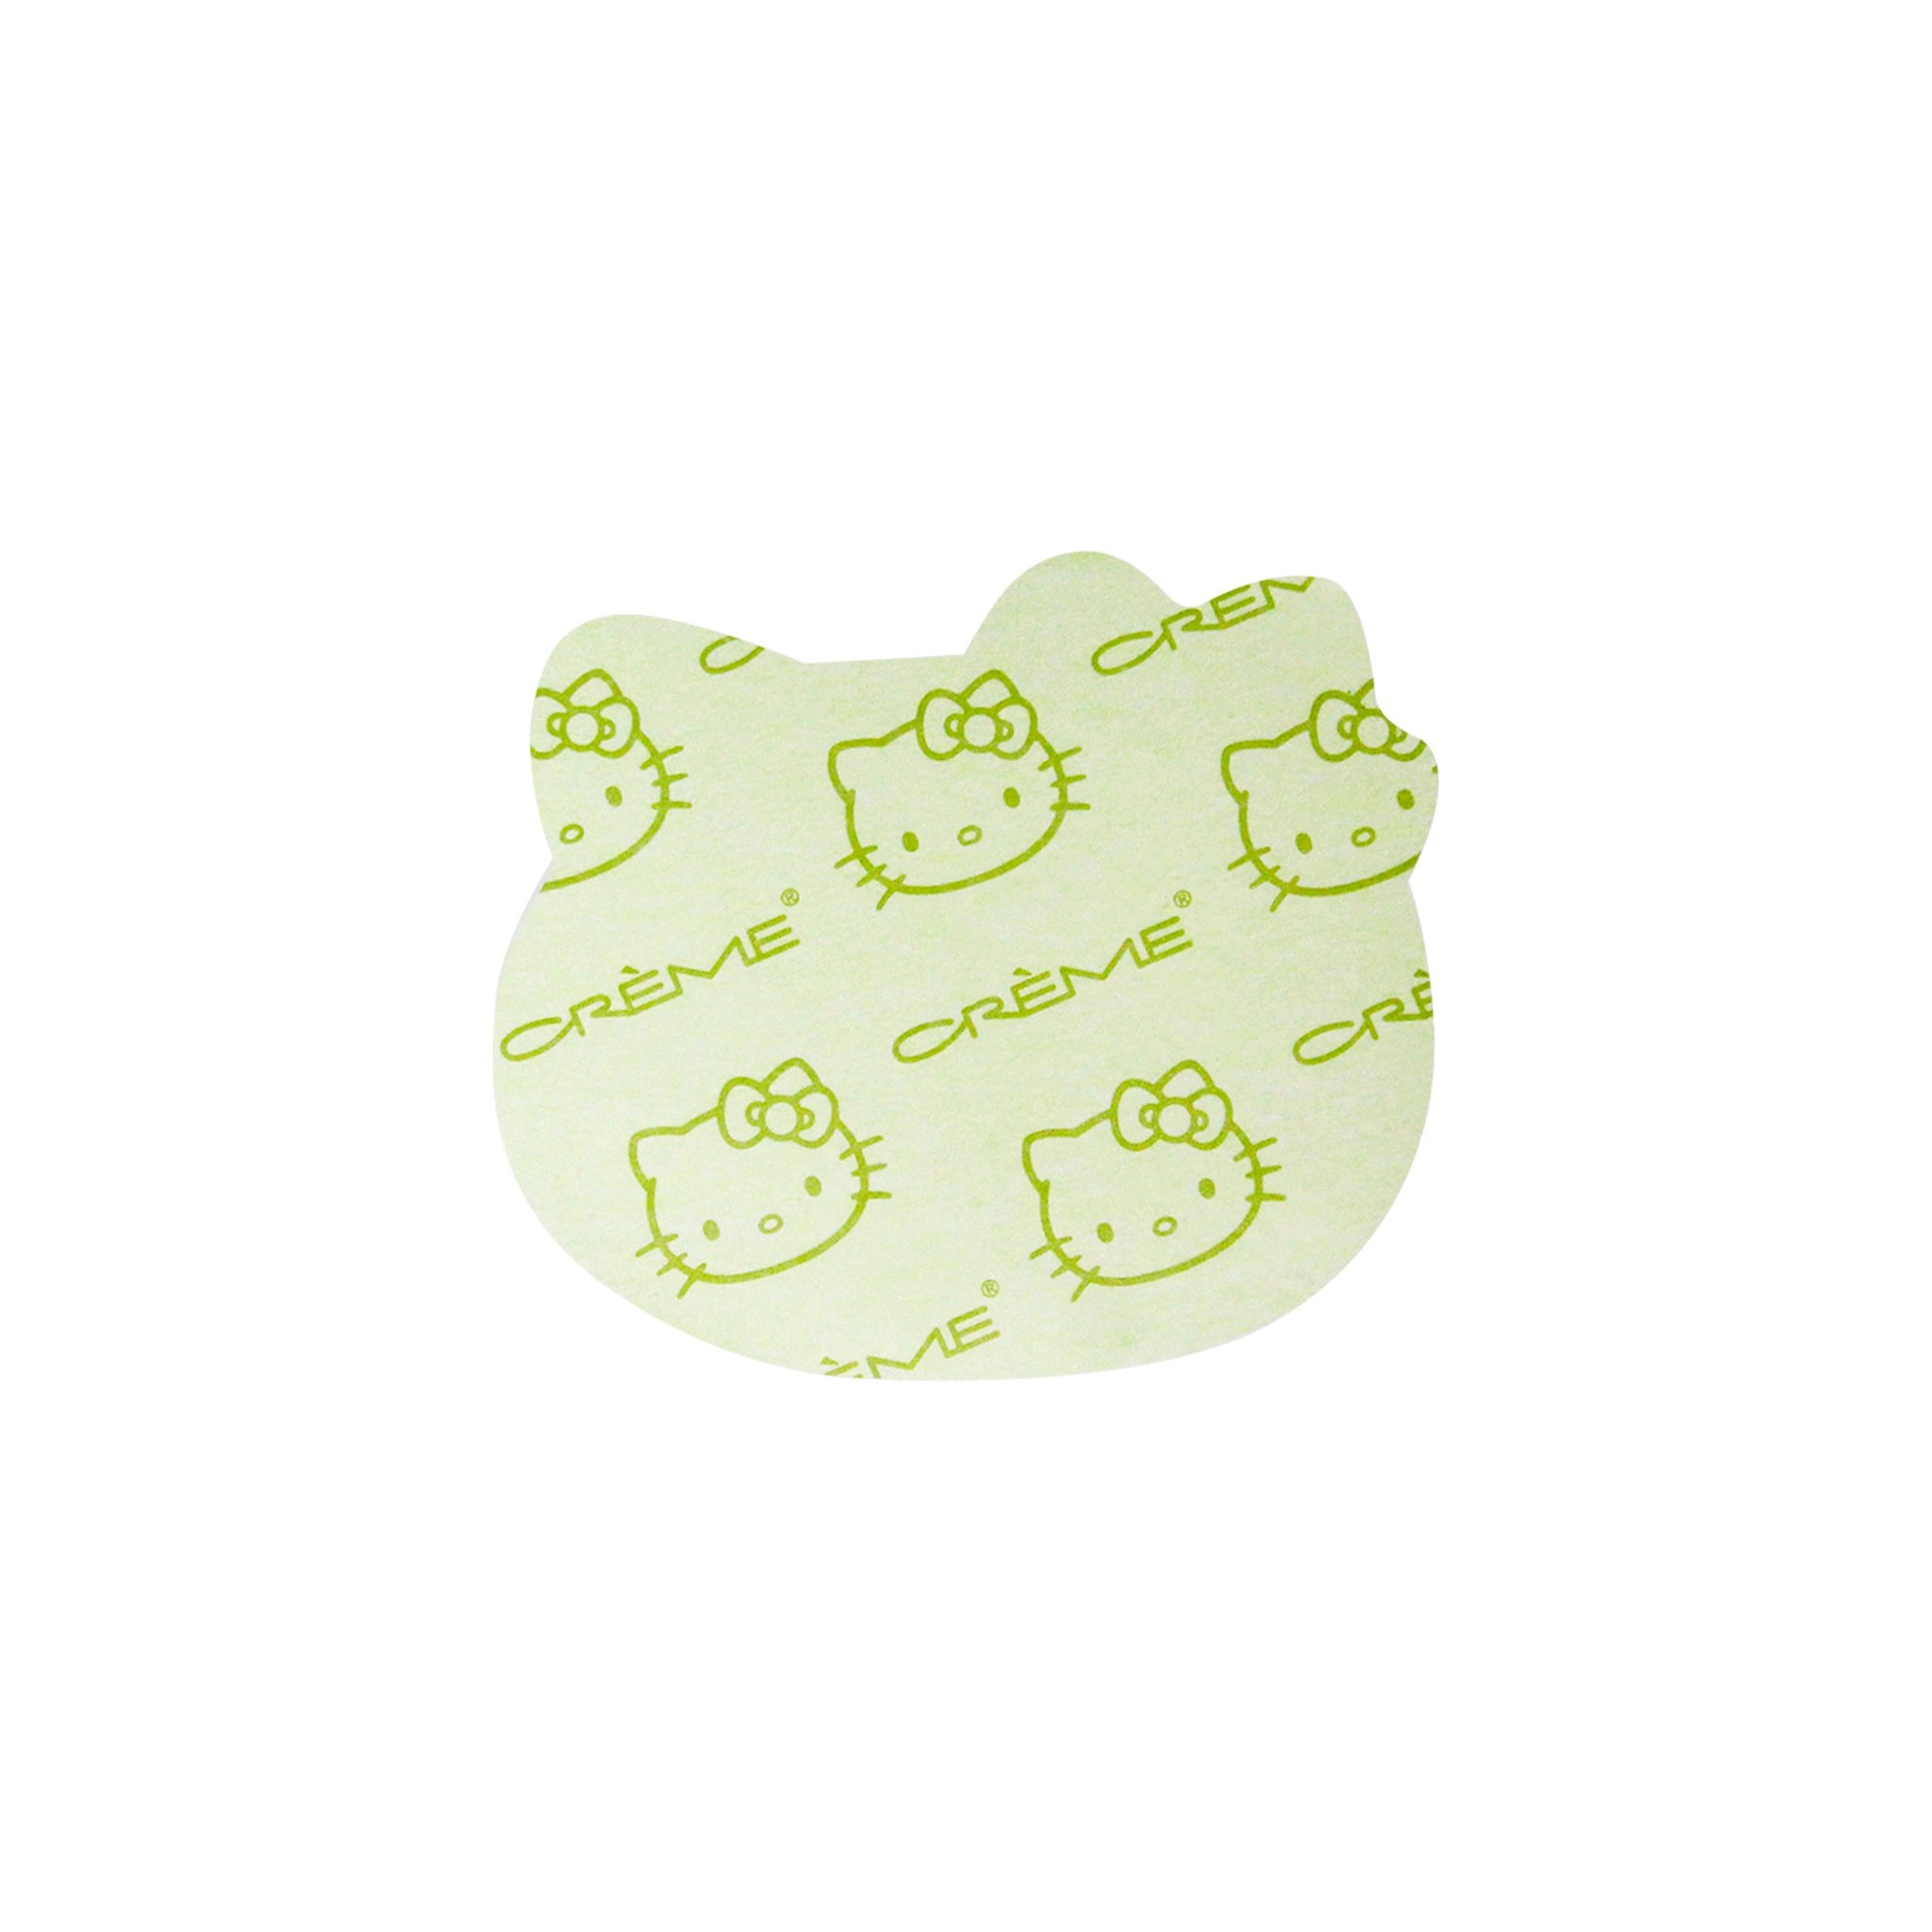 The Crème Shop x Hello Kitty Matcha Blotting Papers + Reusable Compact Mirror (Limited Edition) Blotting Paper The Crème Shop x Sanrio 